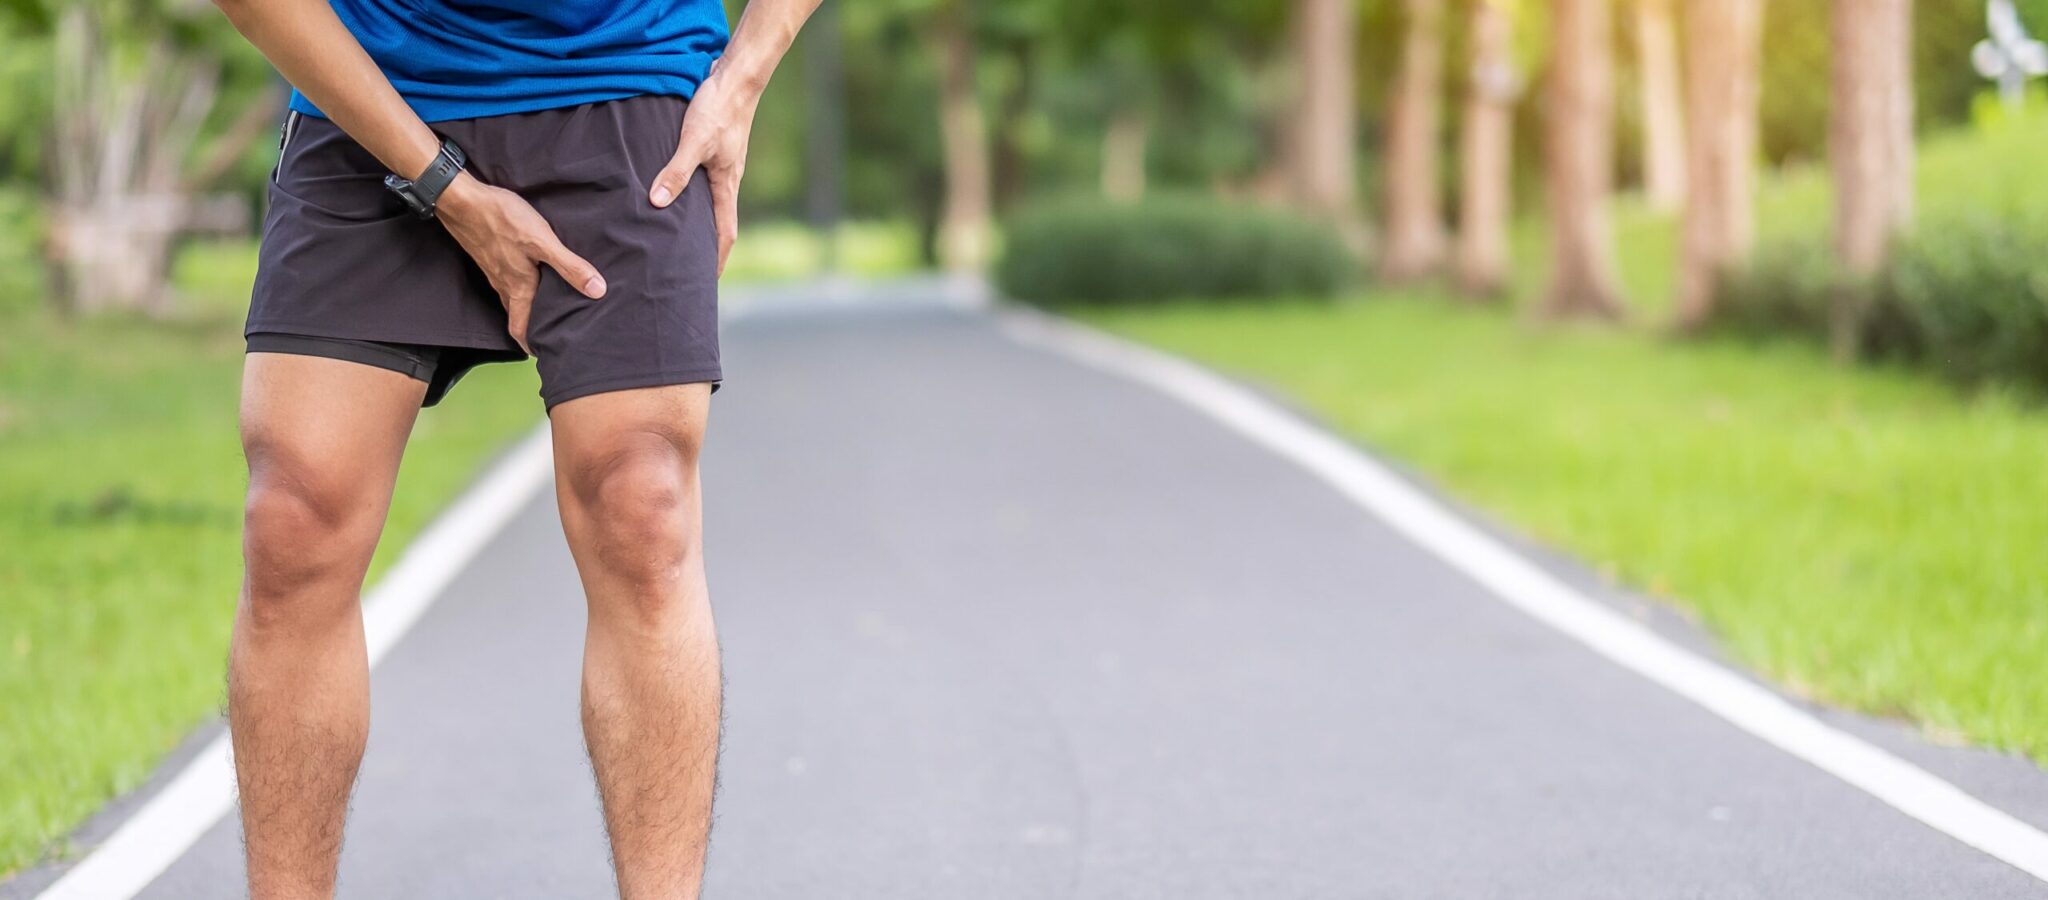 Returning to physical activity after groin pain injury